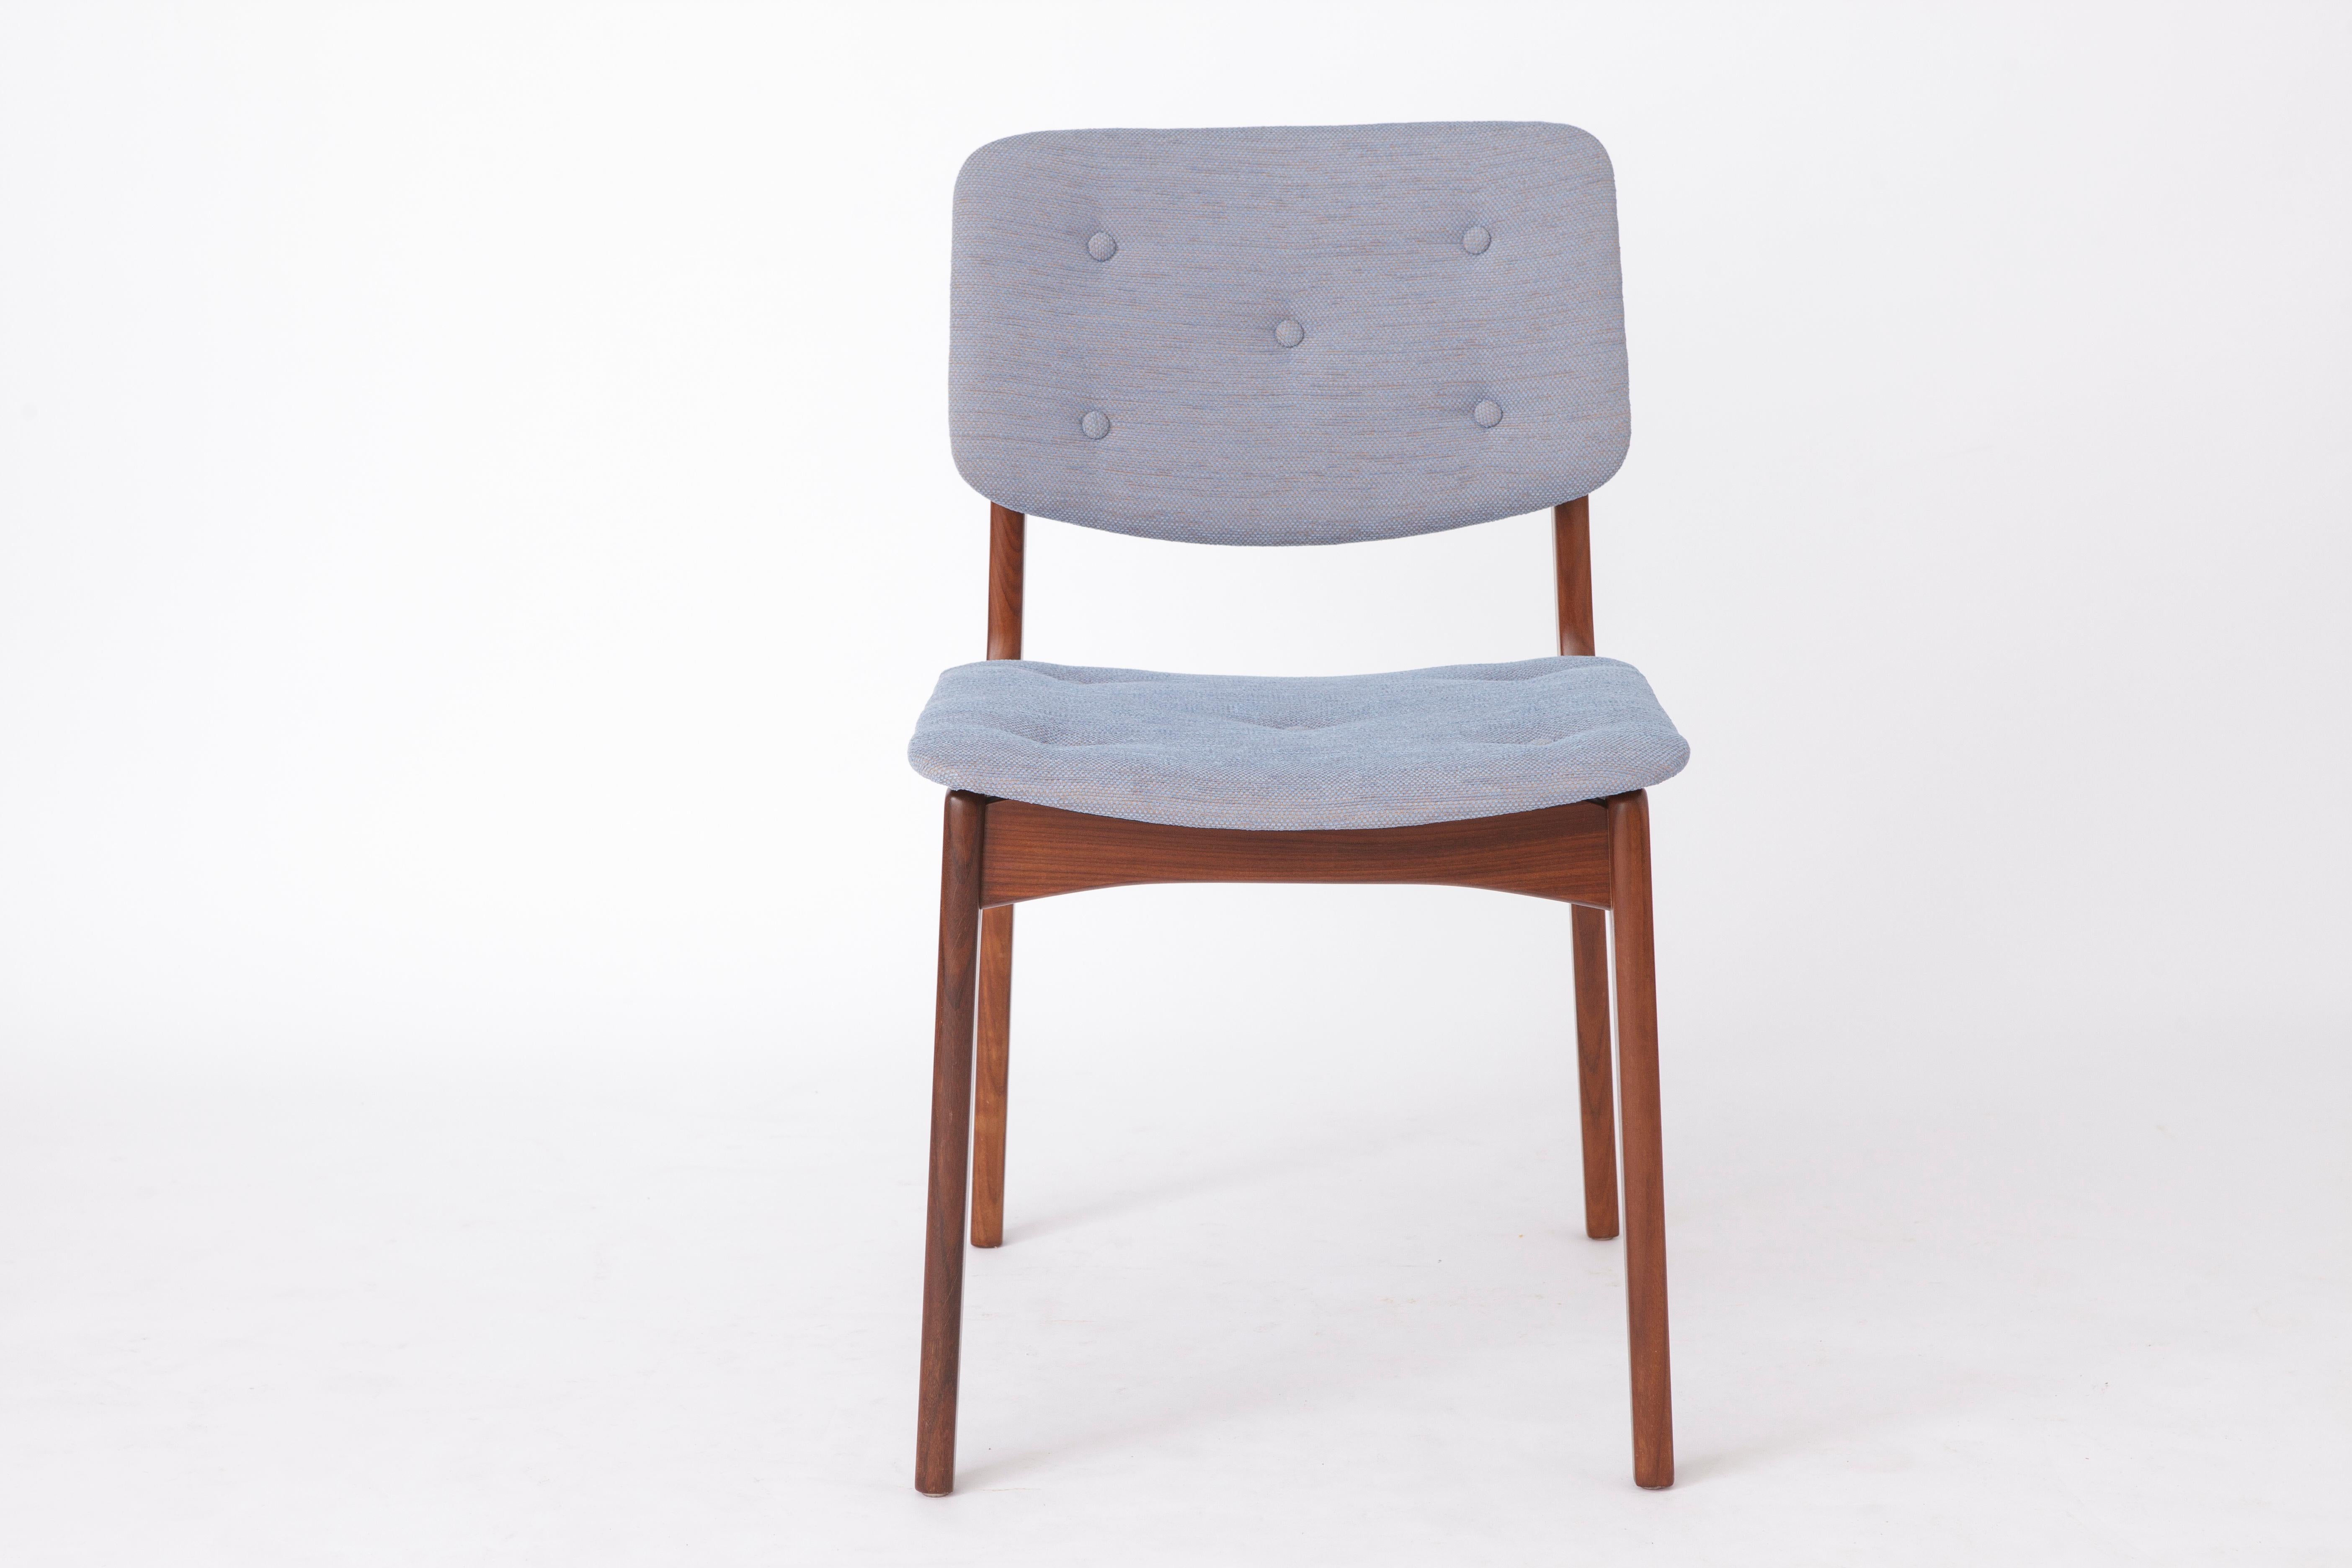 Single mid-century desk chair. 
Production period: 1970s. 
Unknown designer. 

Very good condition. Stable teak chair frame.
Newly reupholstered with blue textile cover. 
